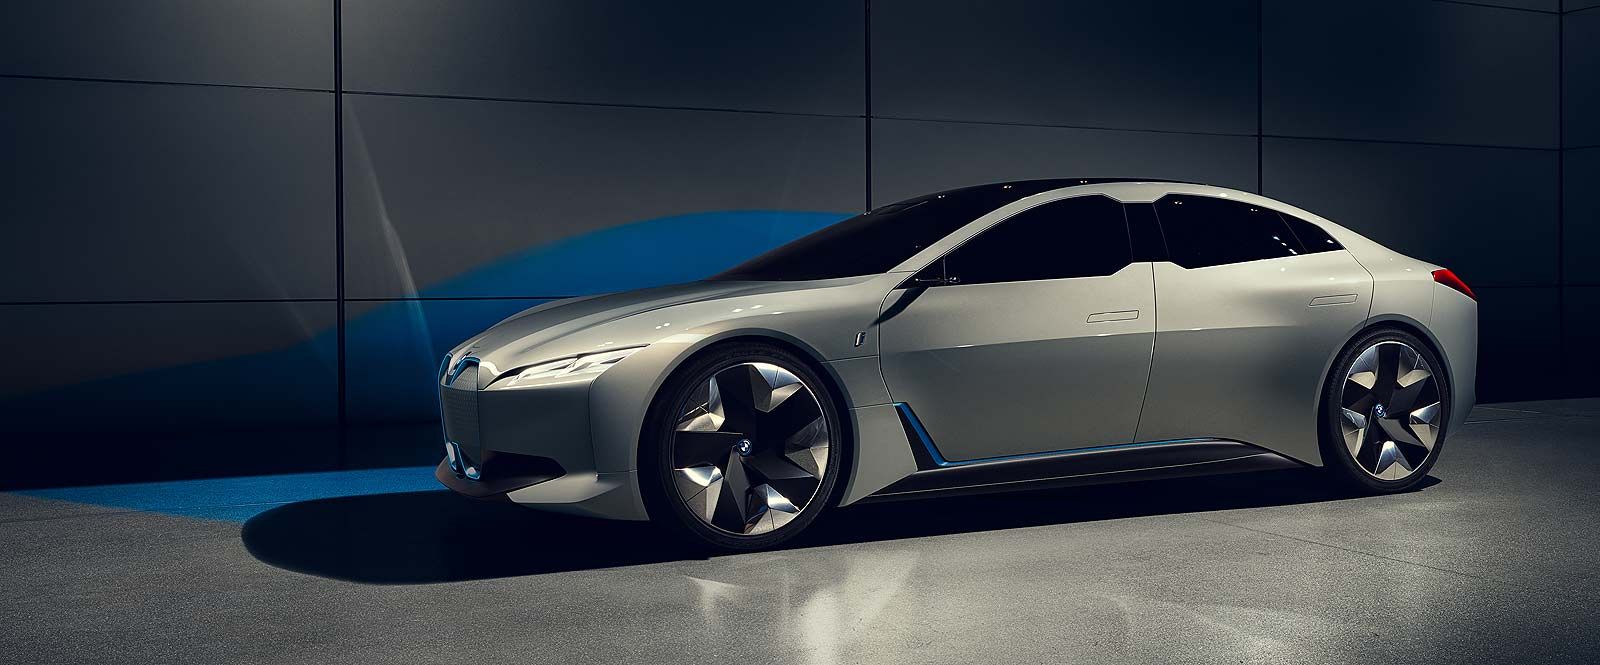 MUST SEE All New 2020 BMW i4 Concept, Features, Review, Photos